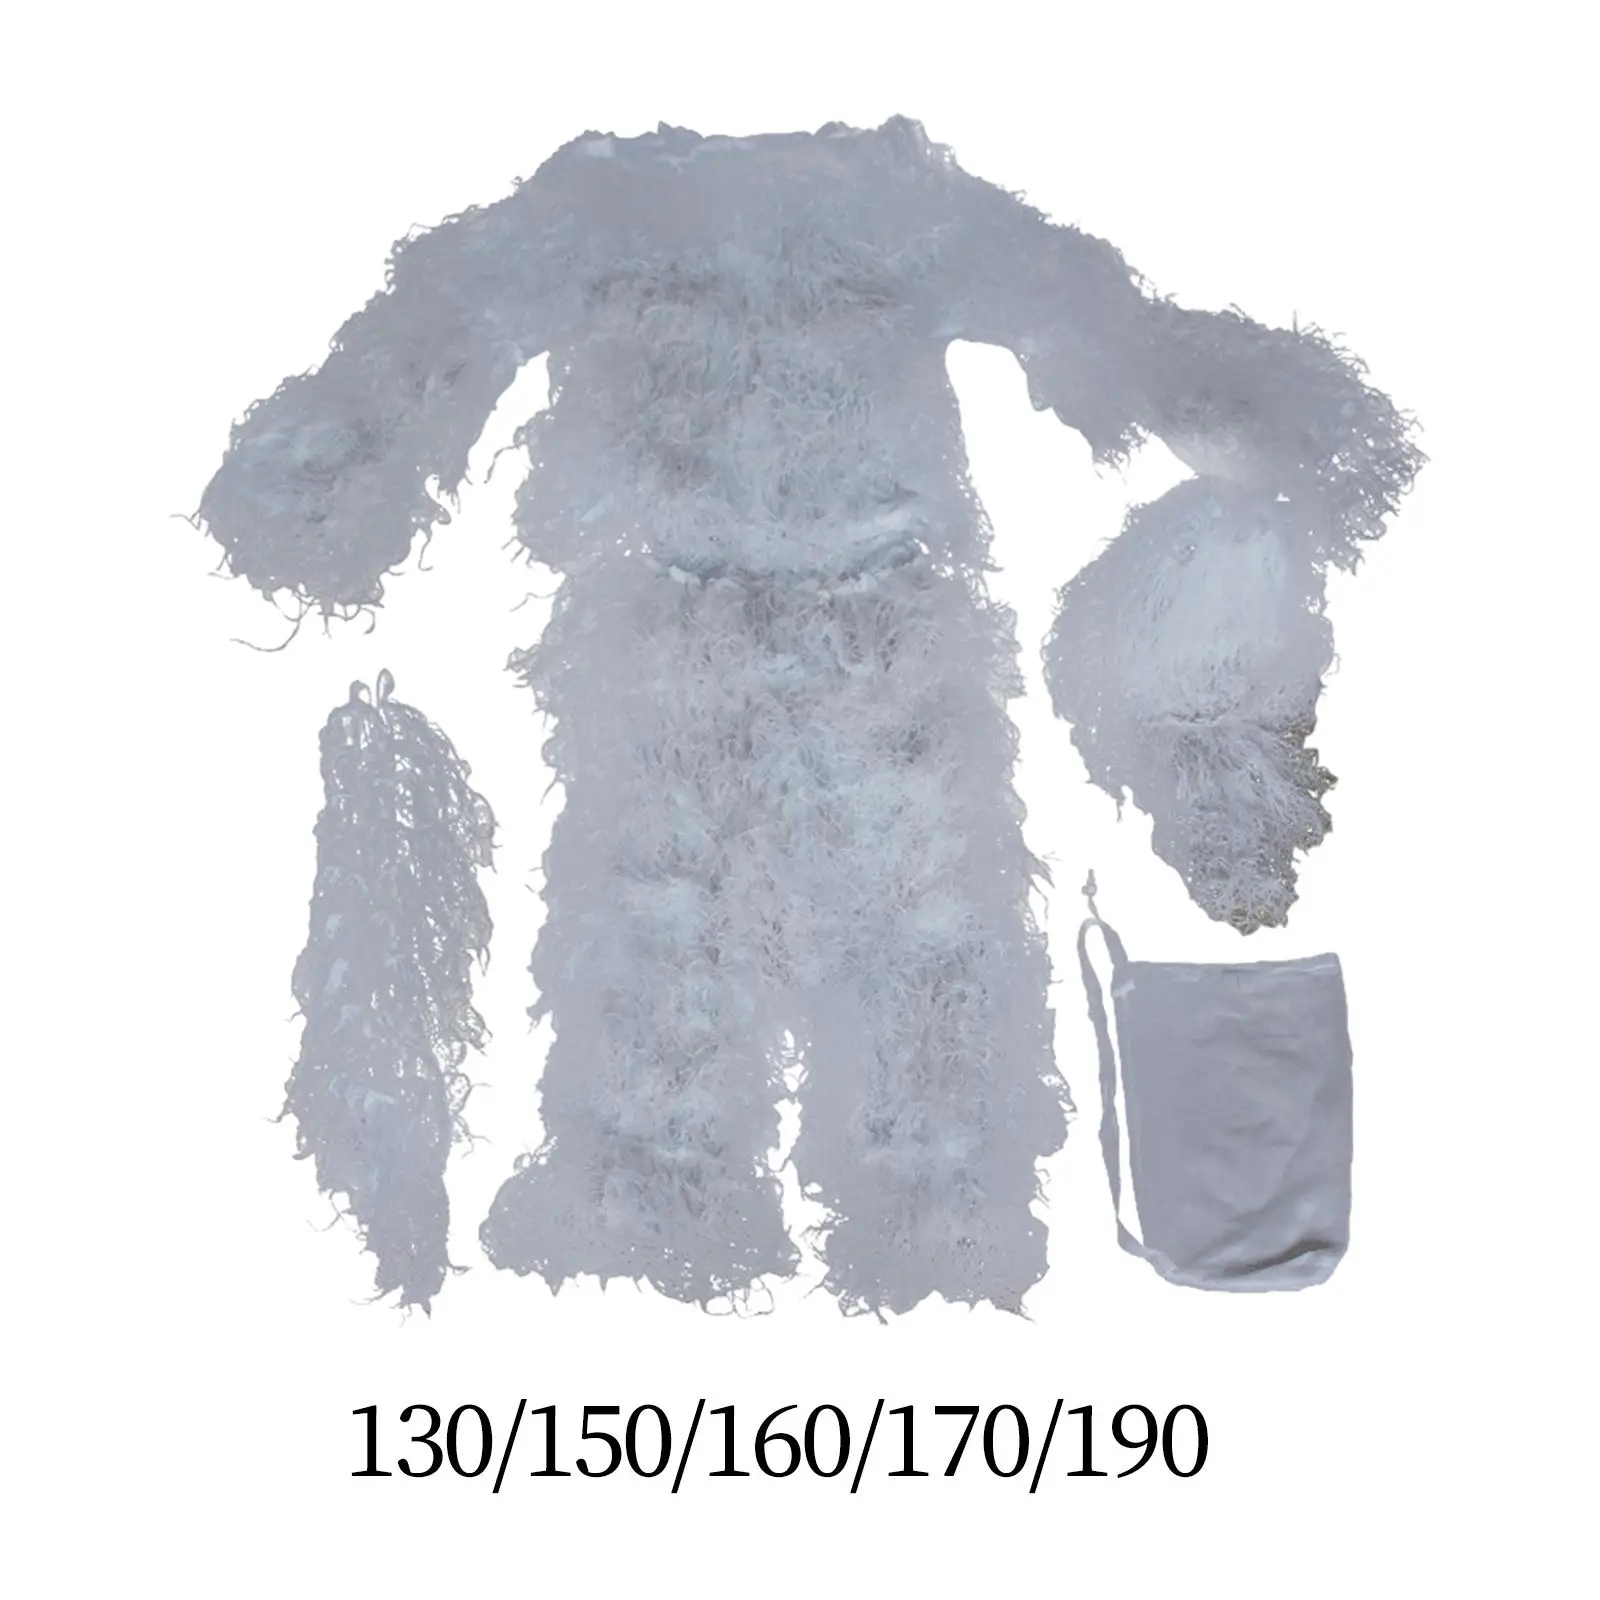 Ghillie Suit Two Piece Suit Hunting Clothes Hunting Suit Clothing for Snowfield Photography Party